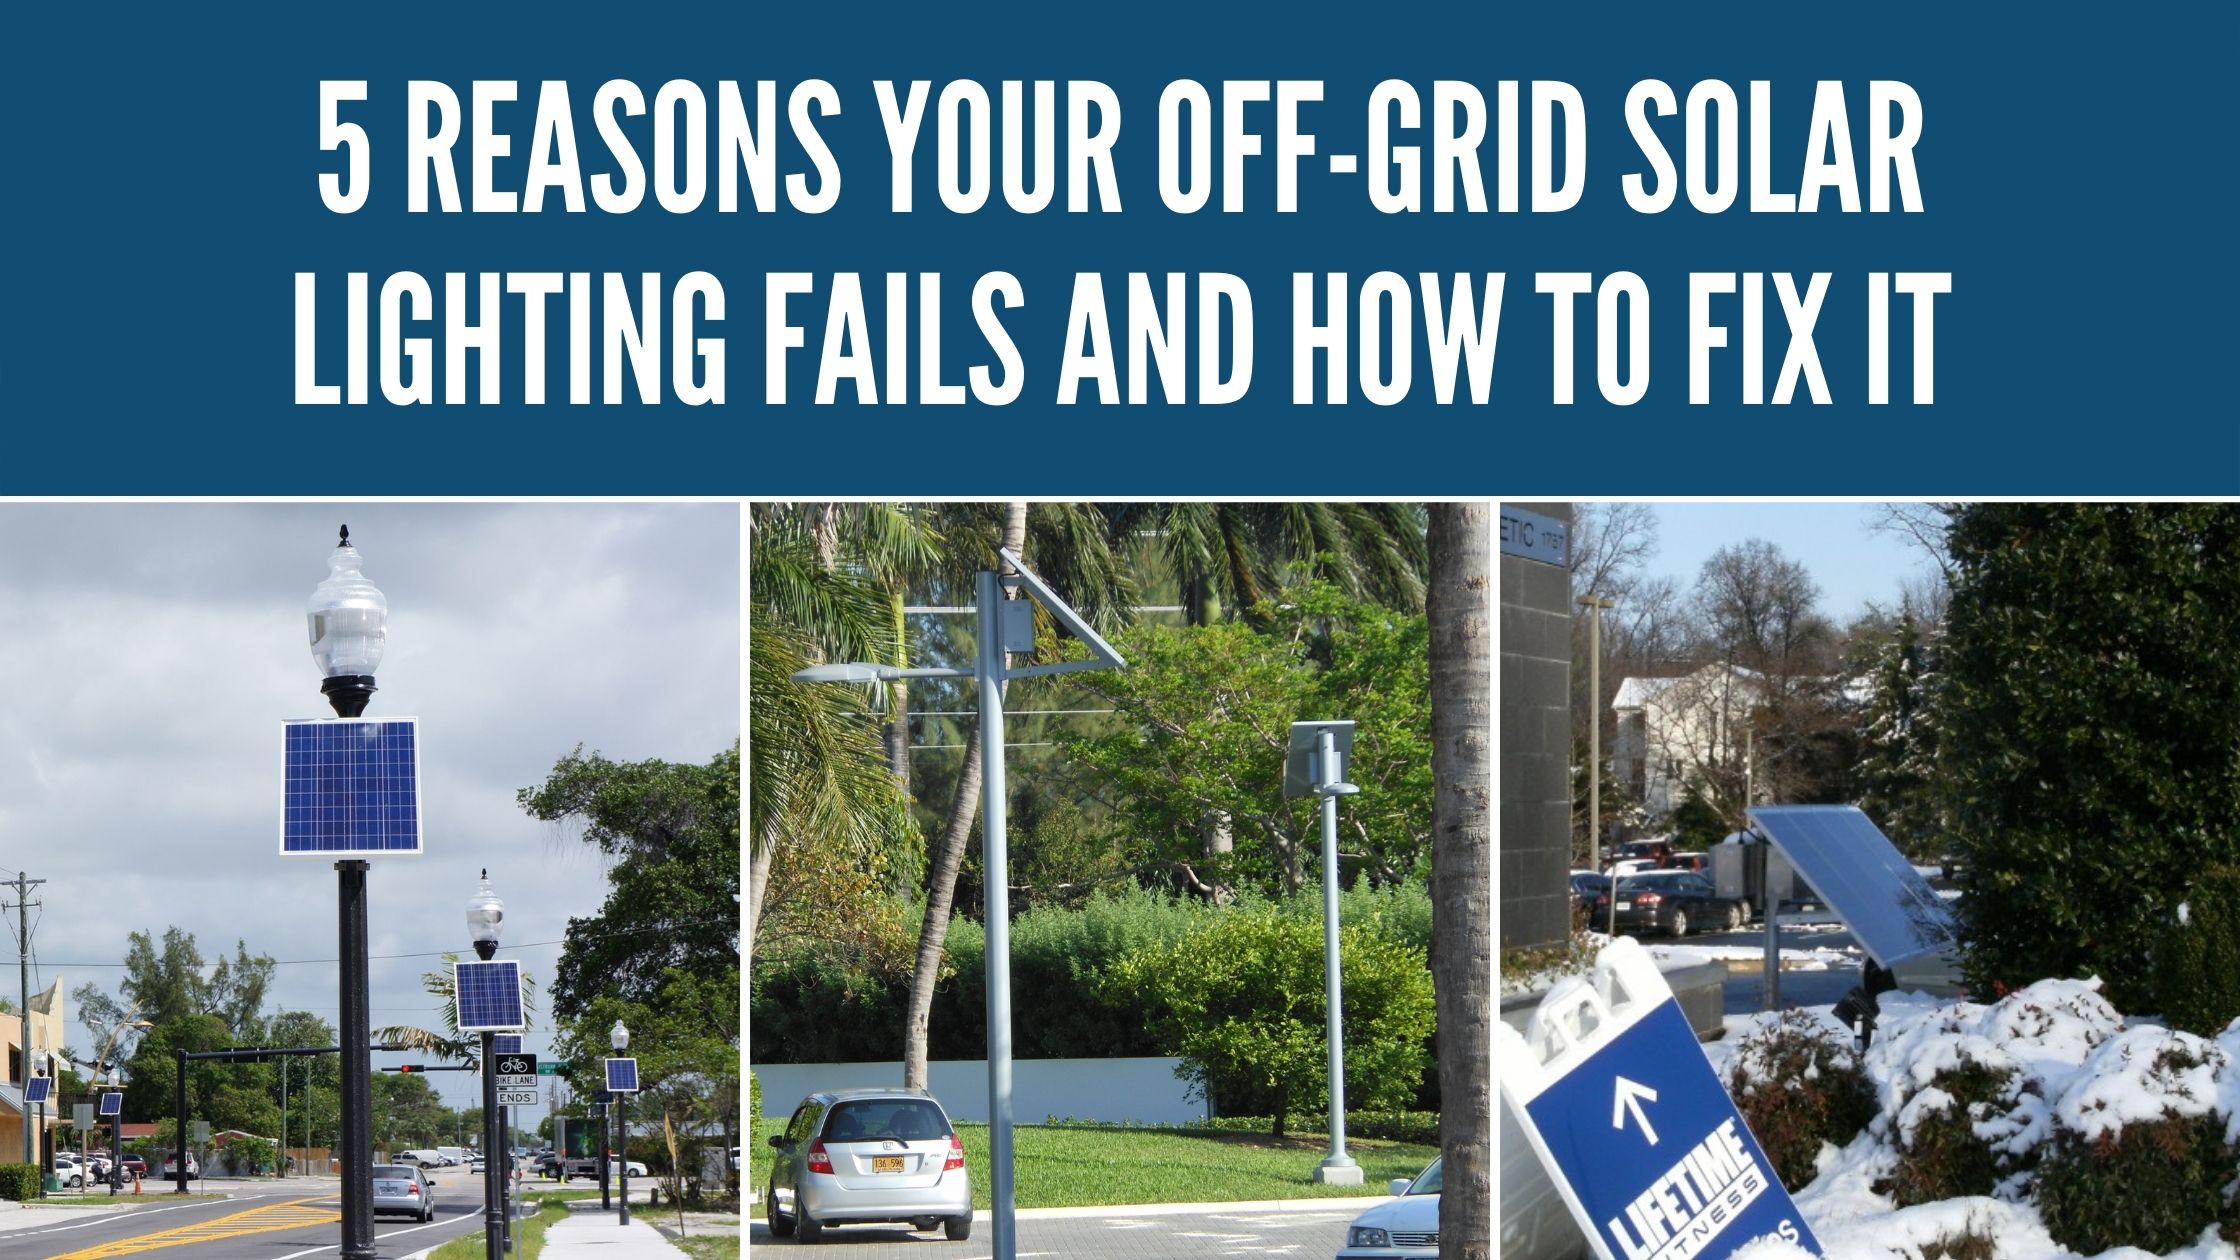 5 Reasons Your Off-Grid Solar Lighting Fails and How to Fix It